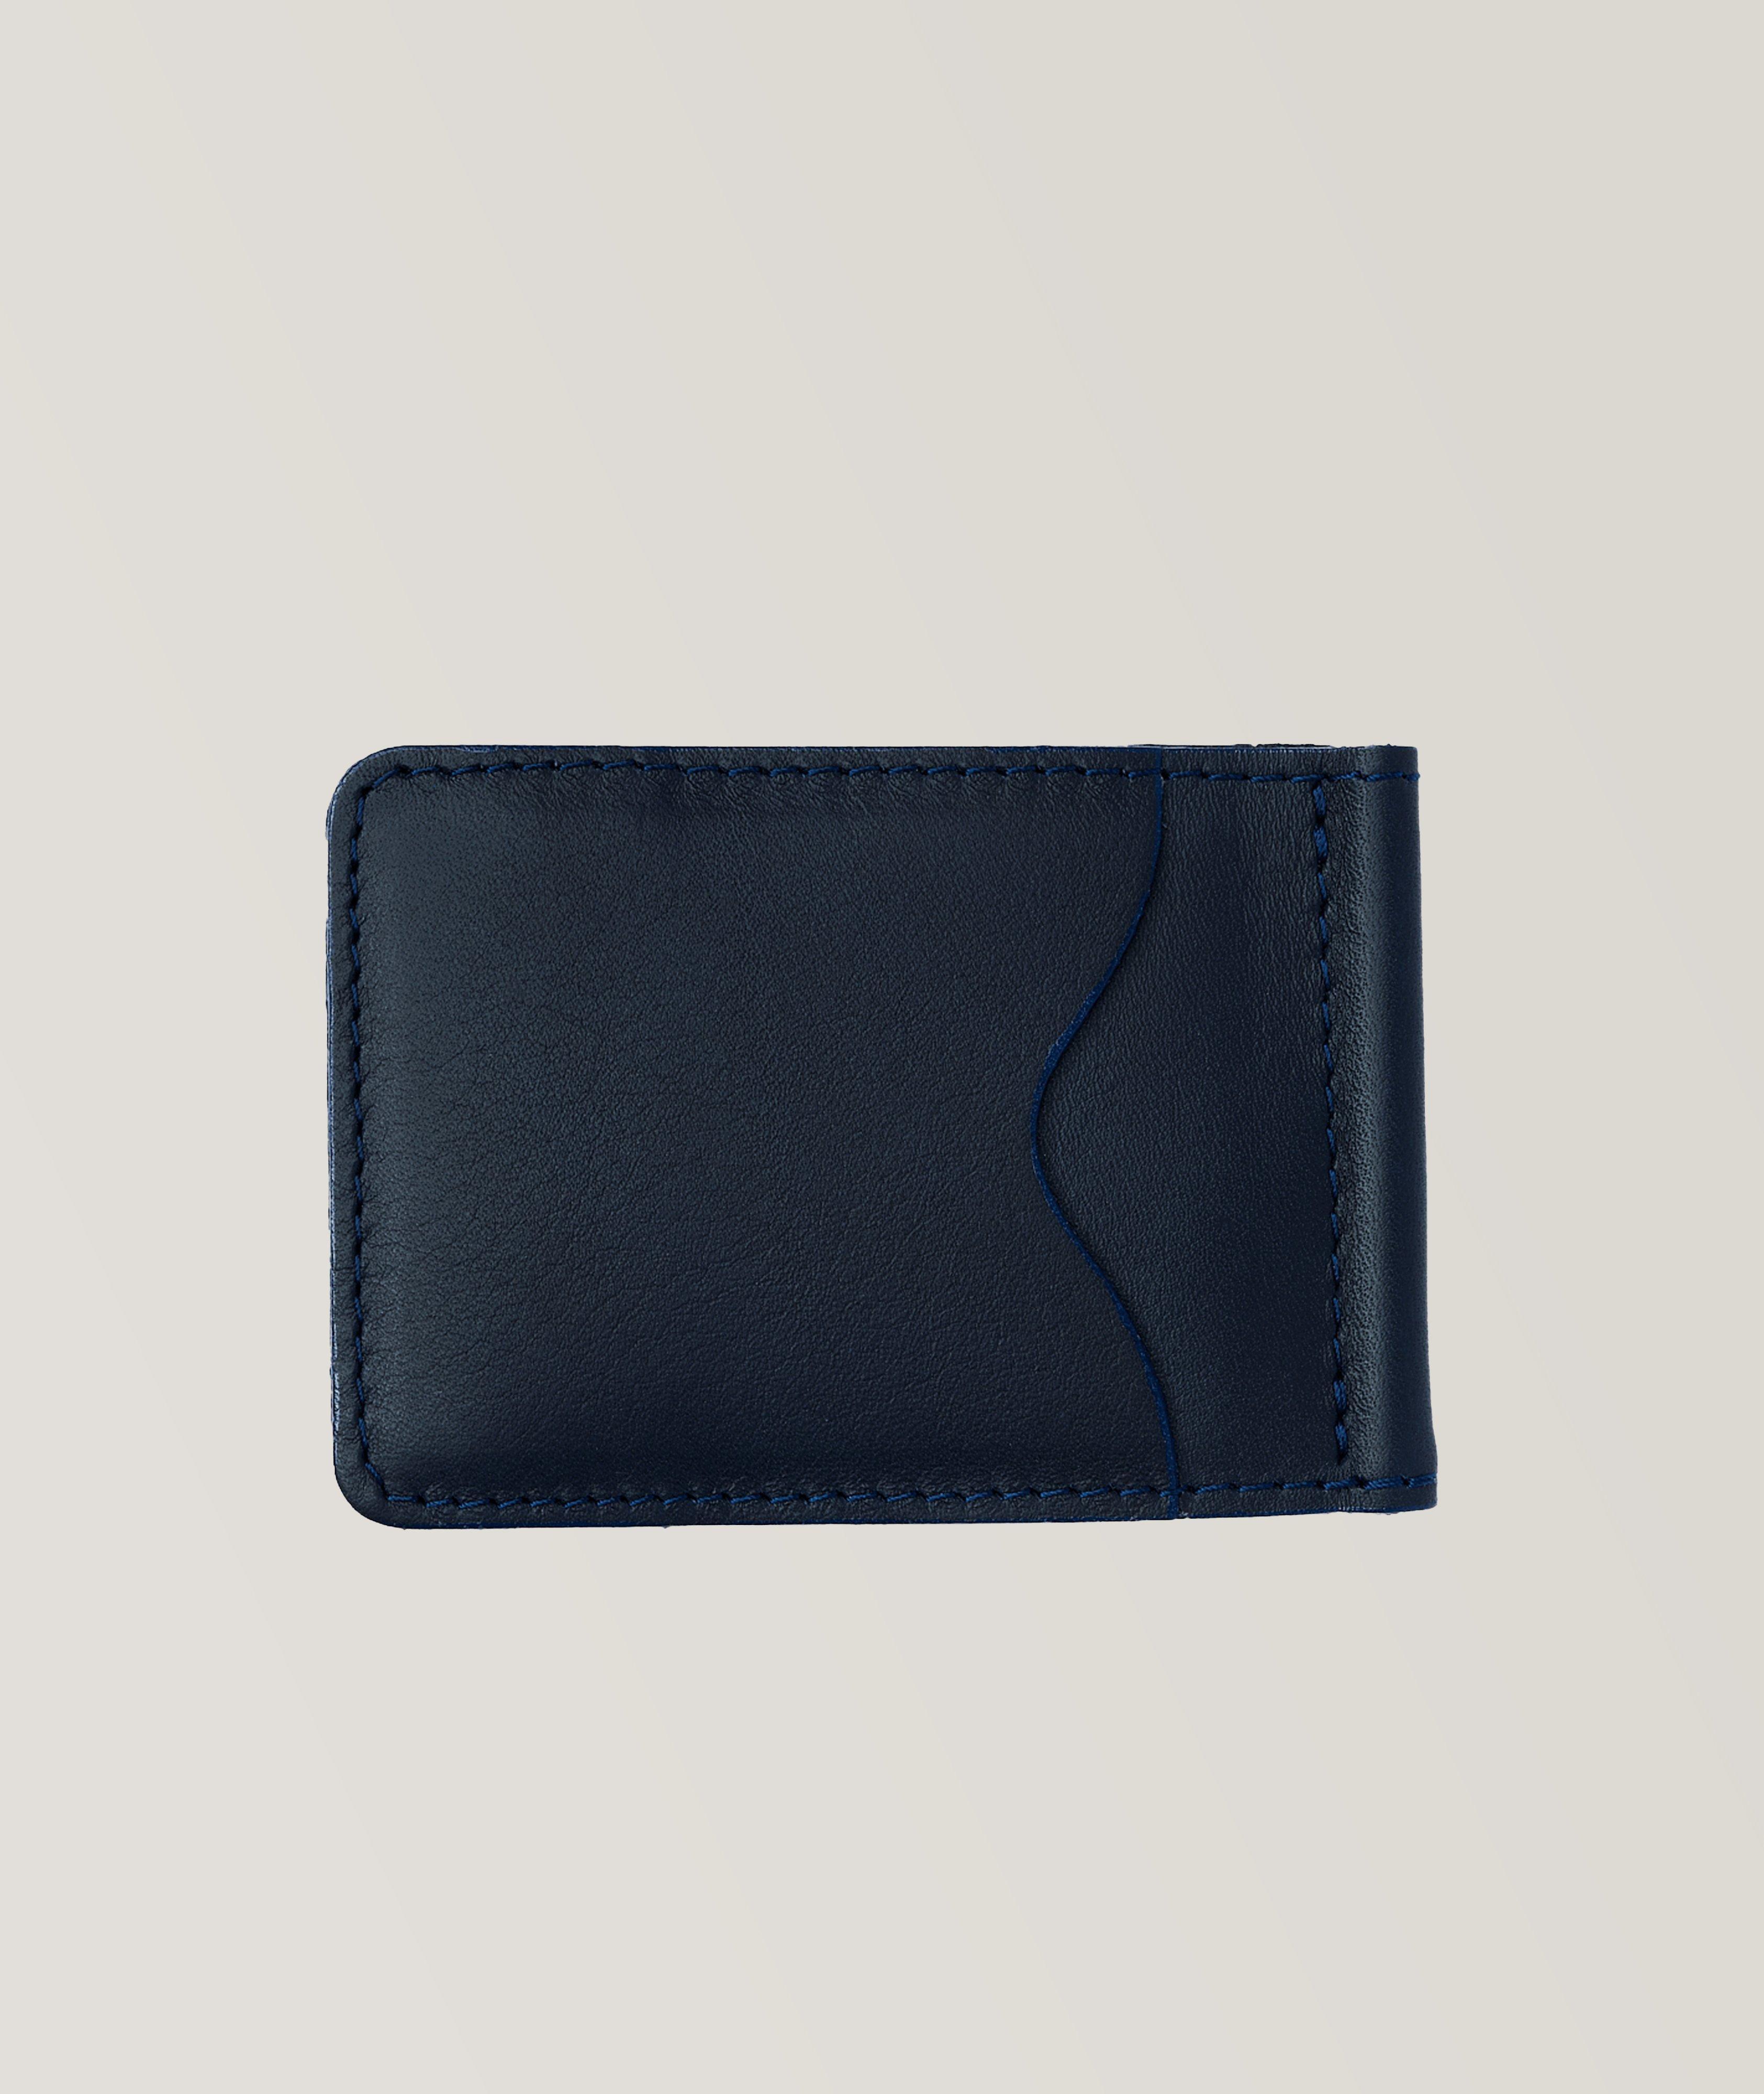 Monte & Coe Slim Leather Wallet With Money Clip, Wallets